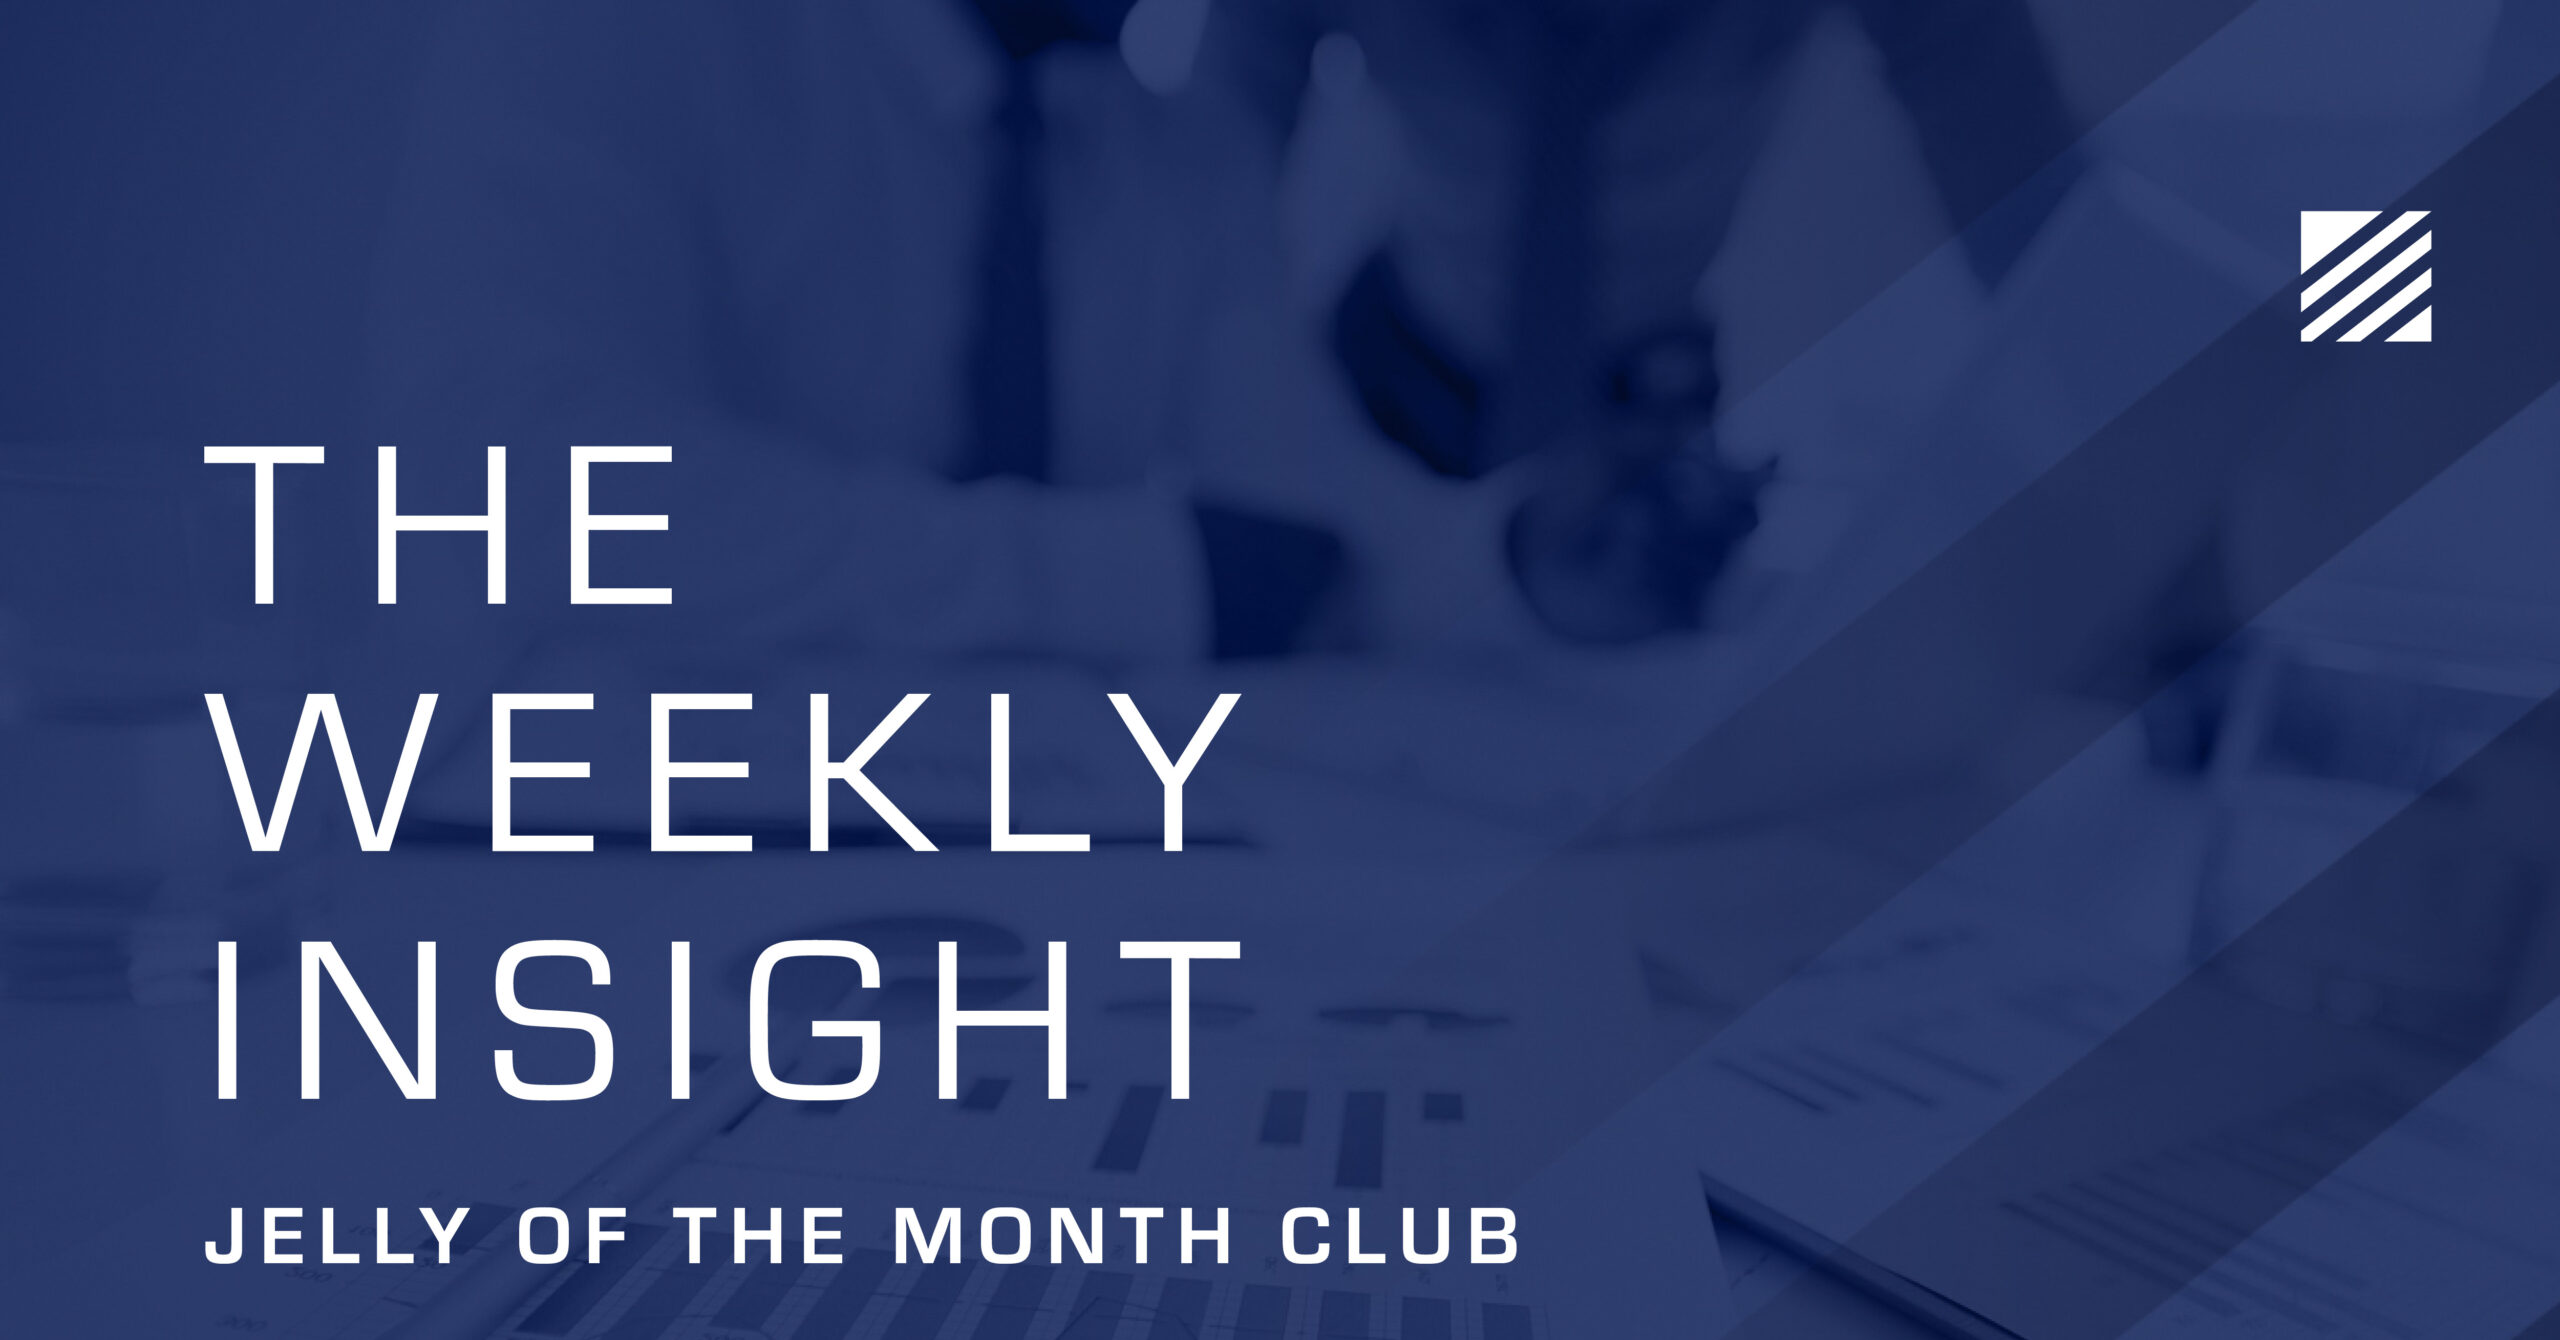 The Weekly Insight: Jelly of the Month Club Graphic